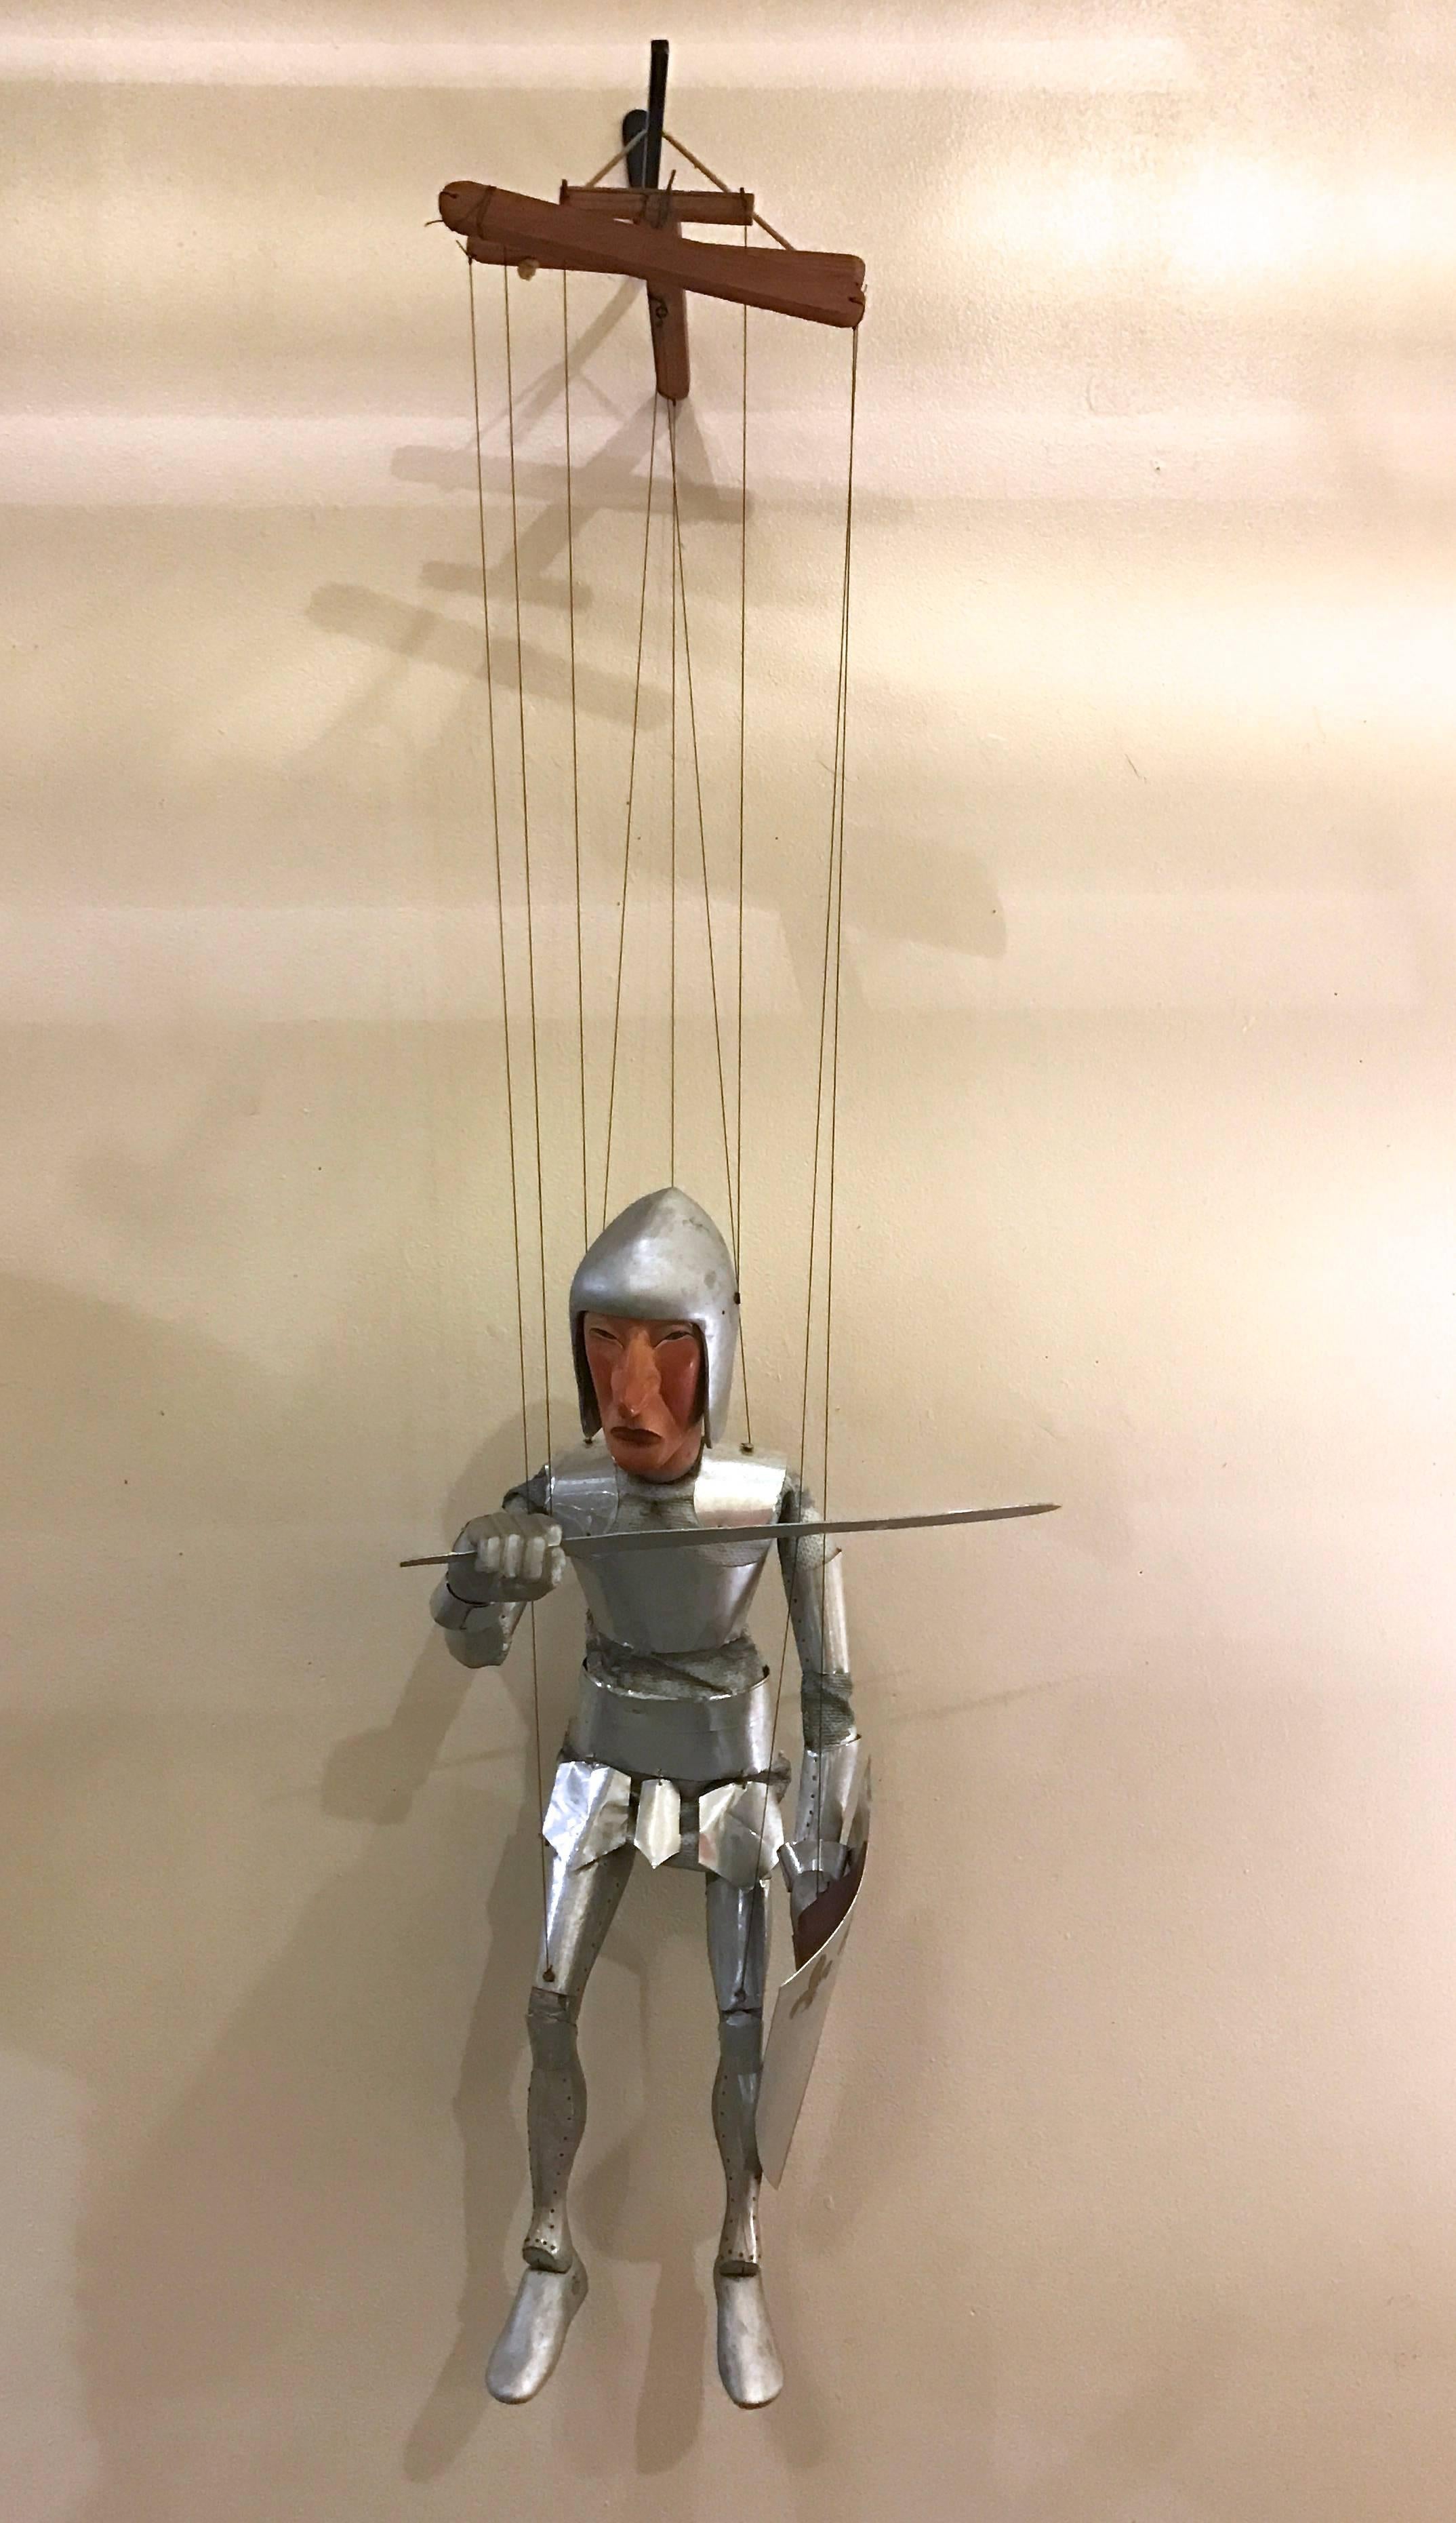 Handcrafted puppet of a Medieval Knight by Californian artist Stan Felman, known for his ceramics and wall sculptures created this Knight of the Roundtable out wood, fabric and aluminum. Amazing amount of detail and craft to its creation, the hand